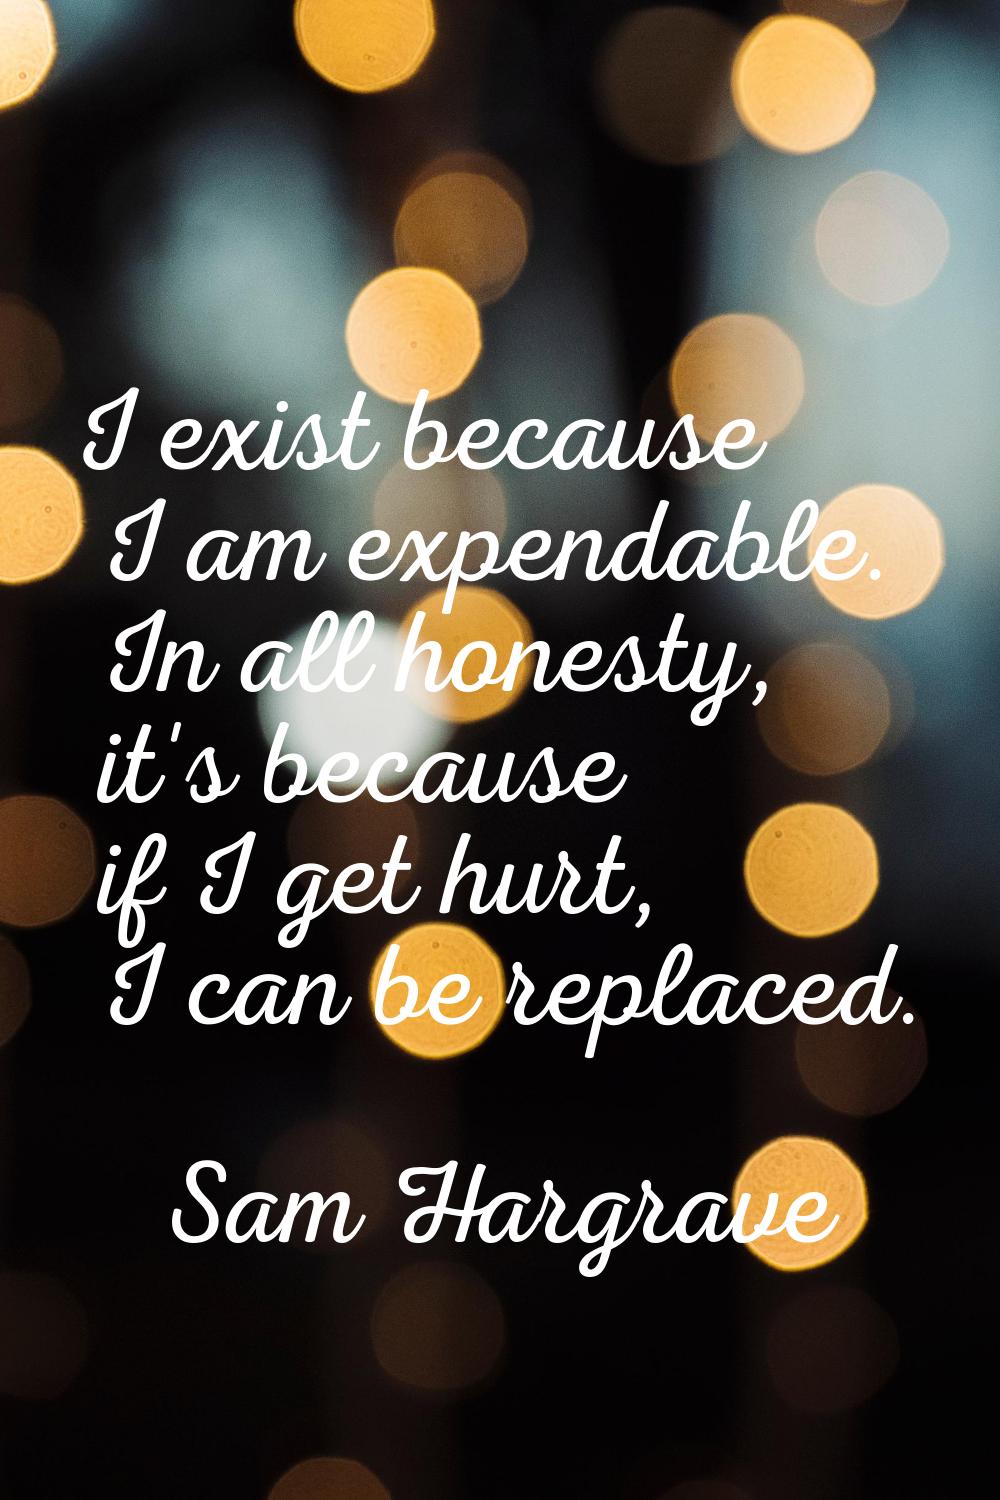 I exist because I am expendable. In all honesty, it's because if I get hurt, I can be replaced.